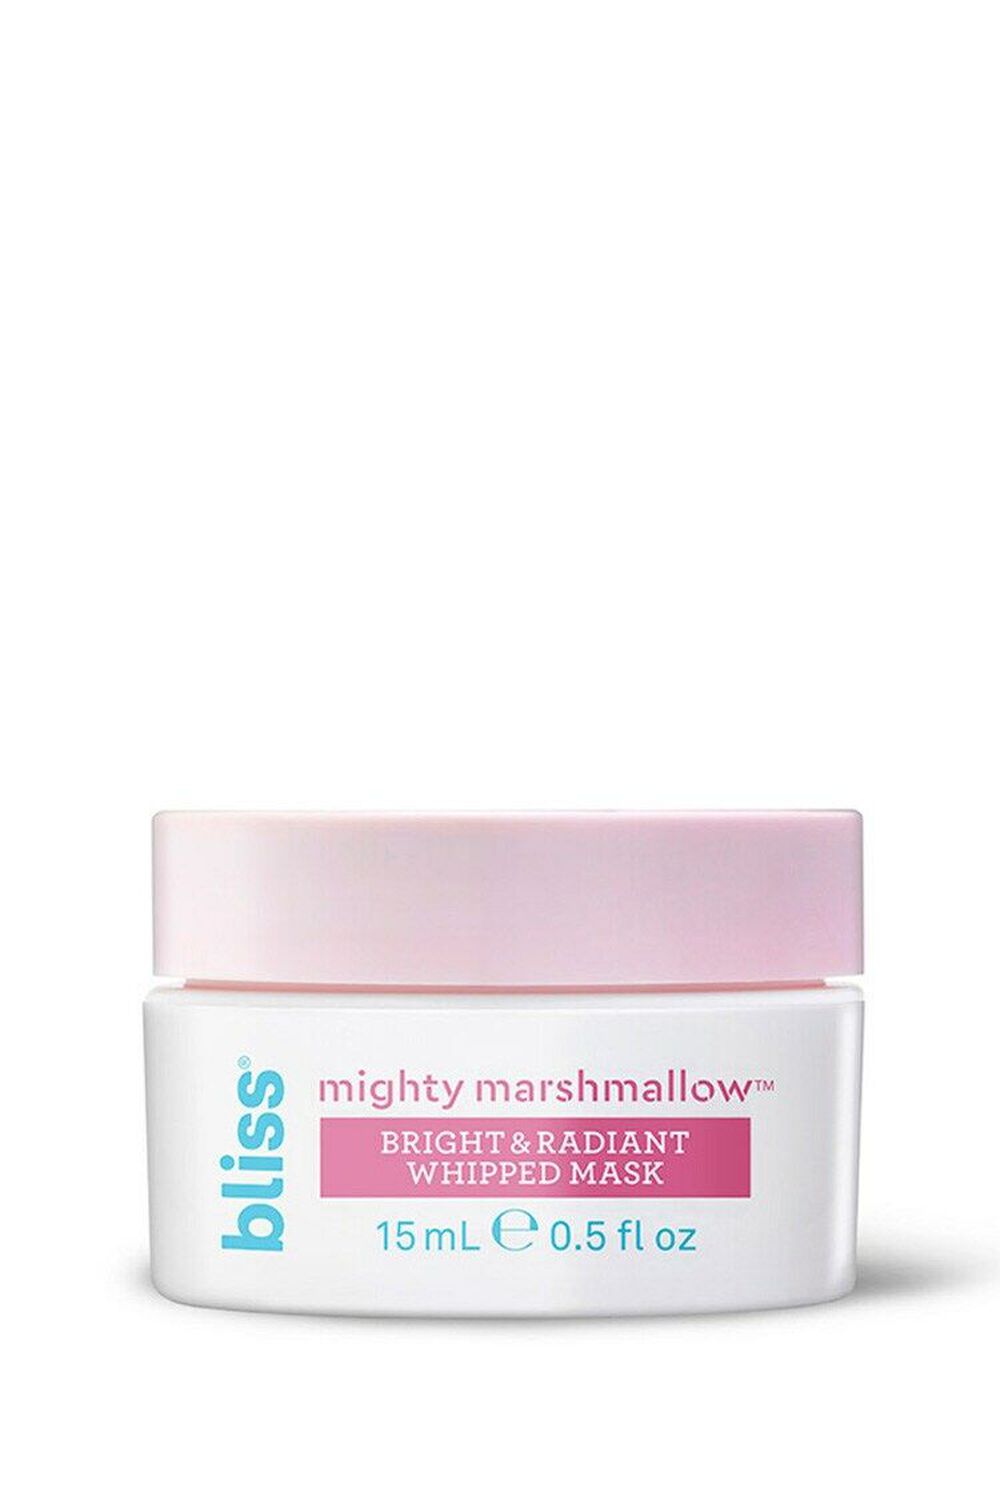 WHITE/PINK Mighty Marshmallow Bright & Radiant Whipped Mask, image 1